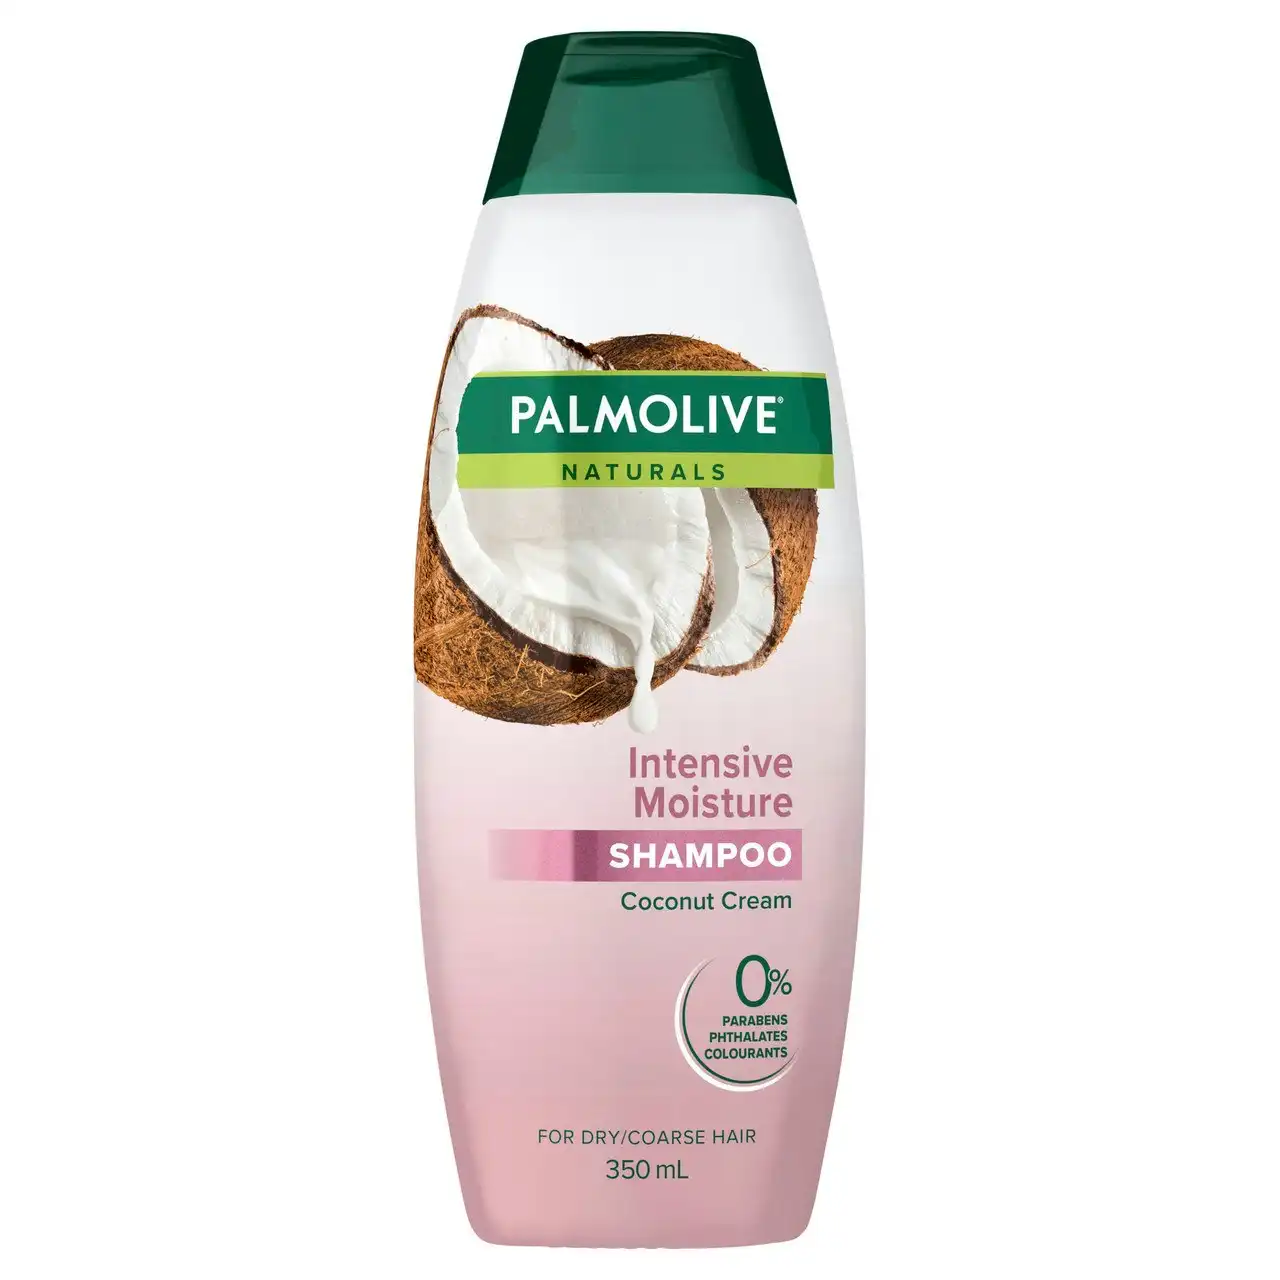 Palmolive Naturals Hair Shampoo, 350mL, Intensive Moisture with Coconut Cream, For Coarse or Dry Hair, No Parabens, Phthalates or Colourants